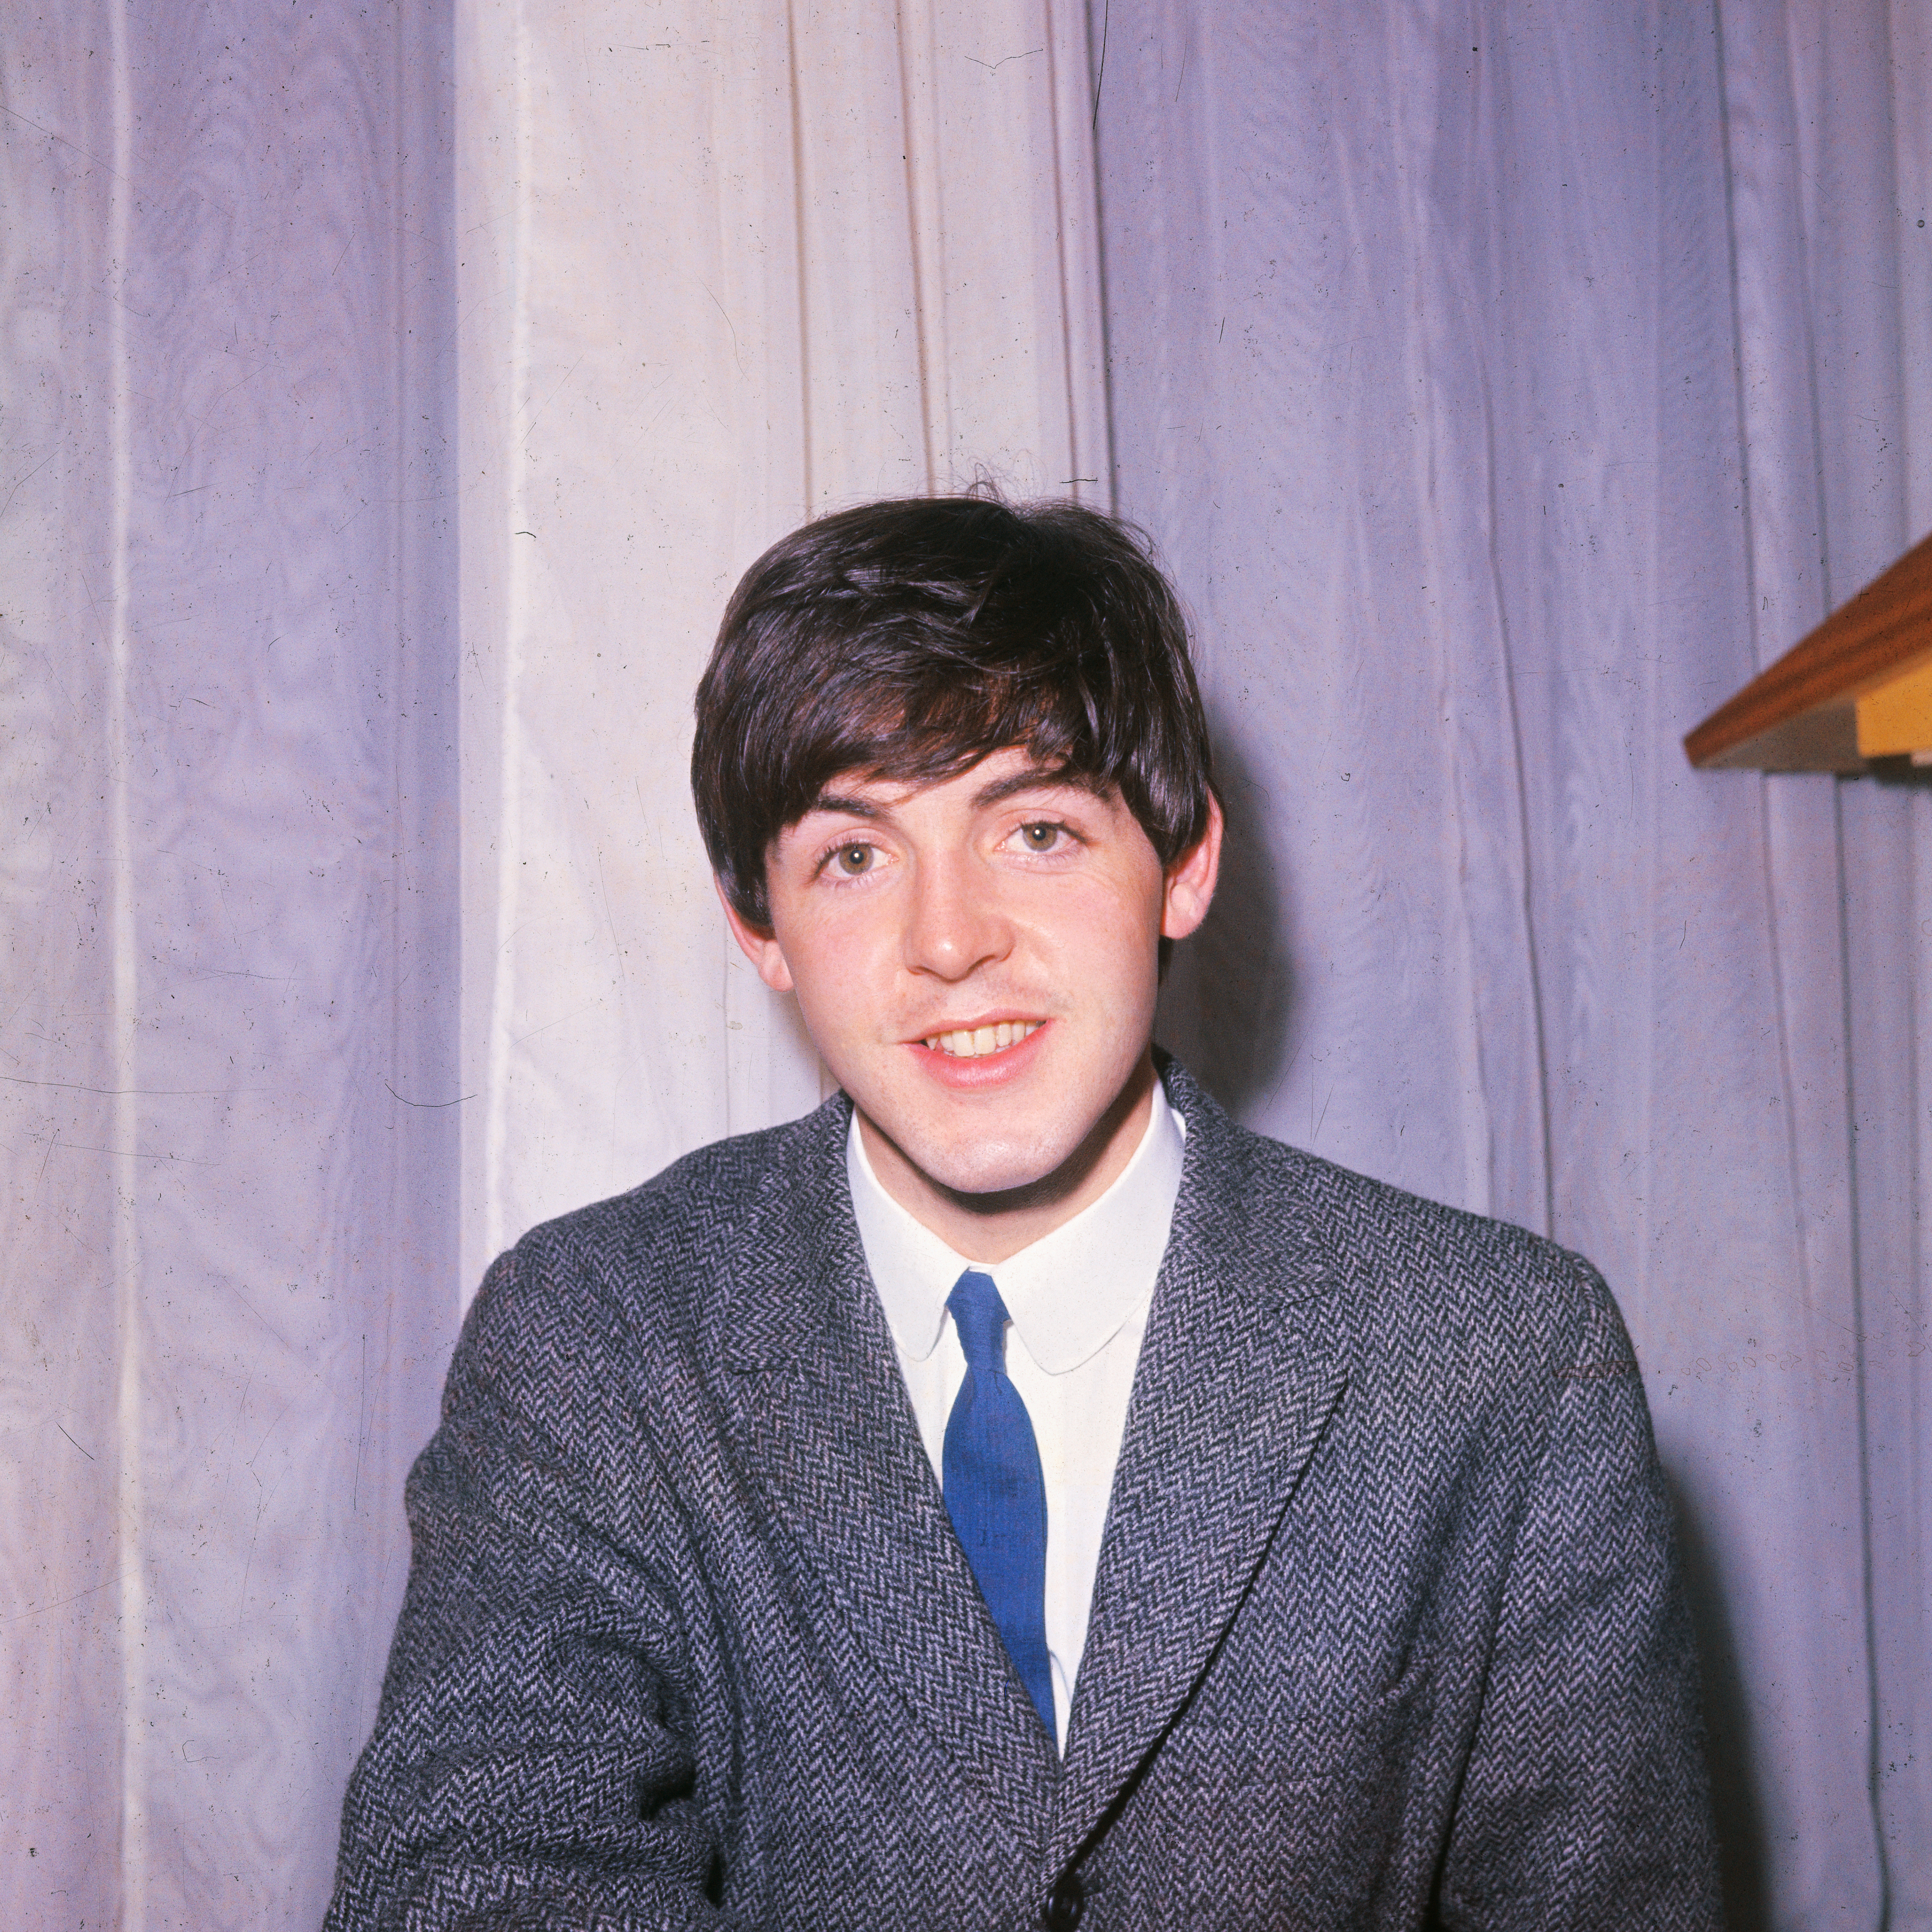 Paul McCartney poses on December 18, 1964 in London, England | Source: Getty Images